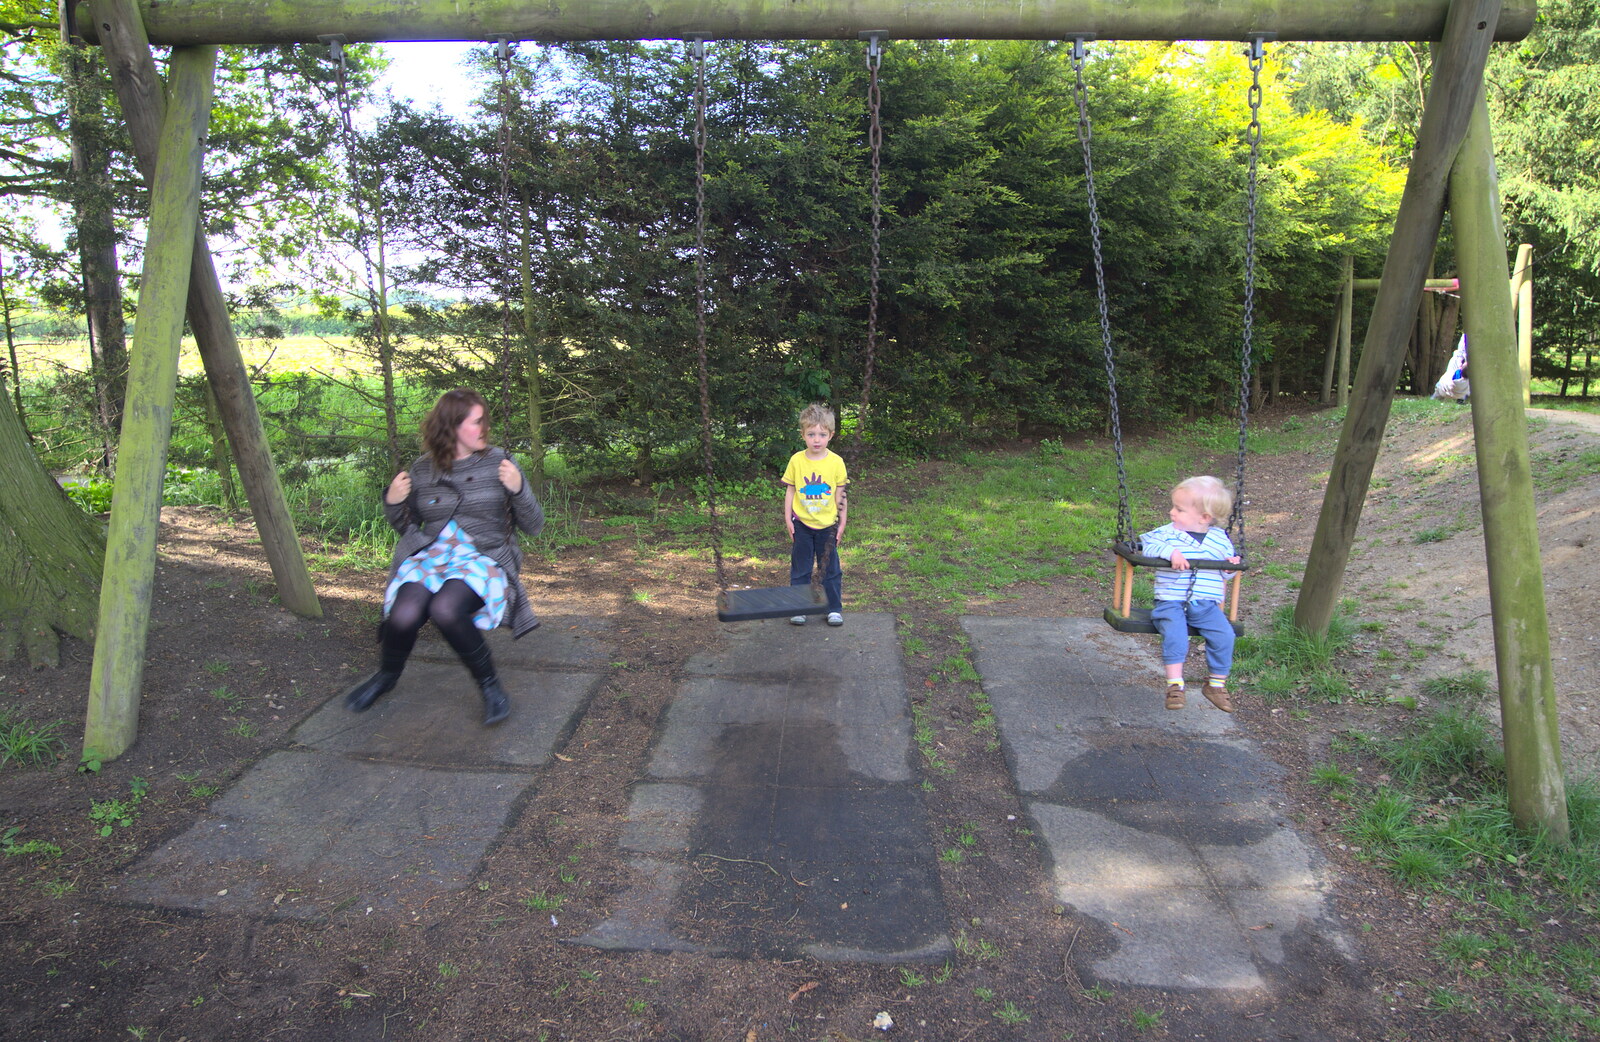 In the morning, Isobel and the boys go for a swing from The Bure Valley Railway, Aylsham, Norfolk - 26th May 2013